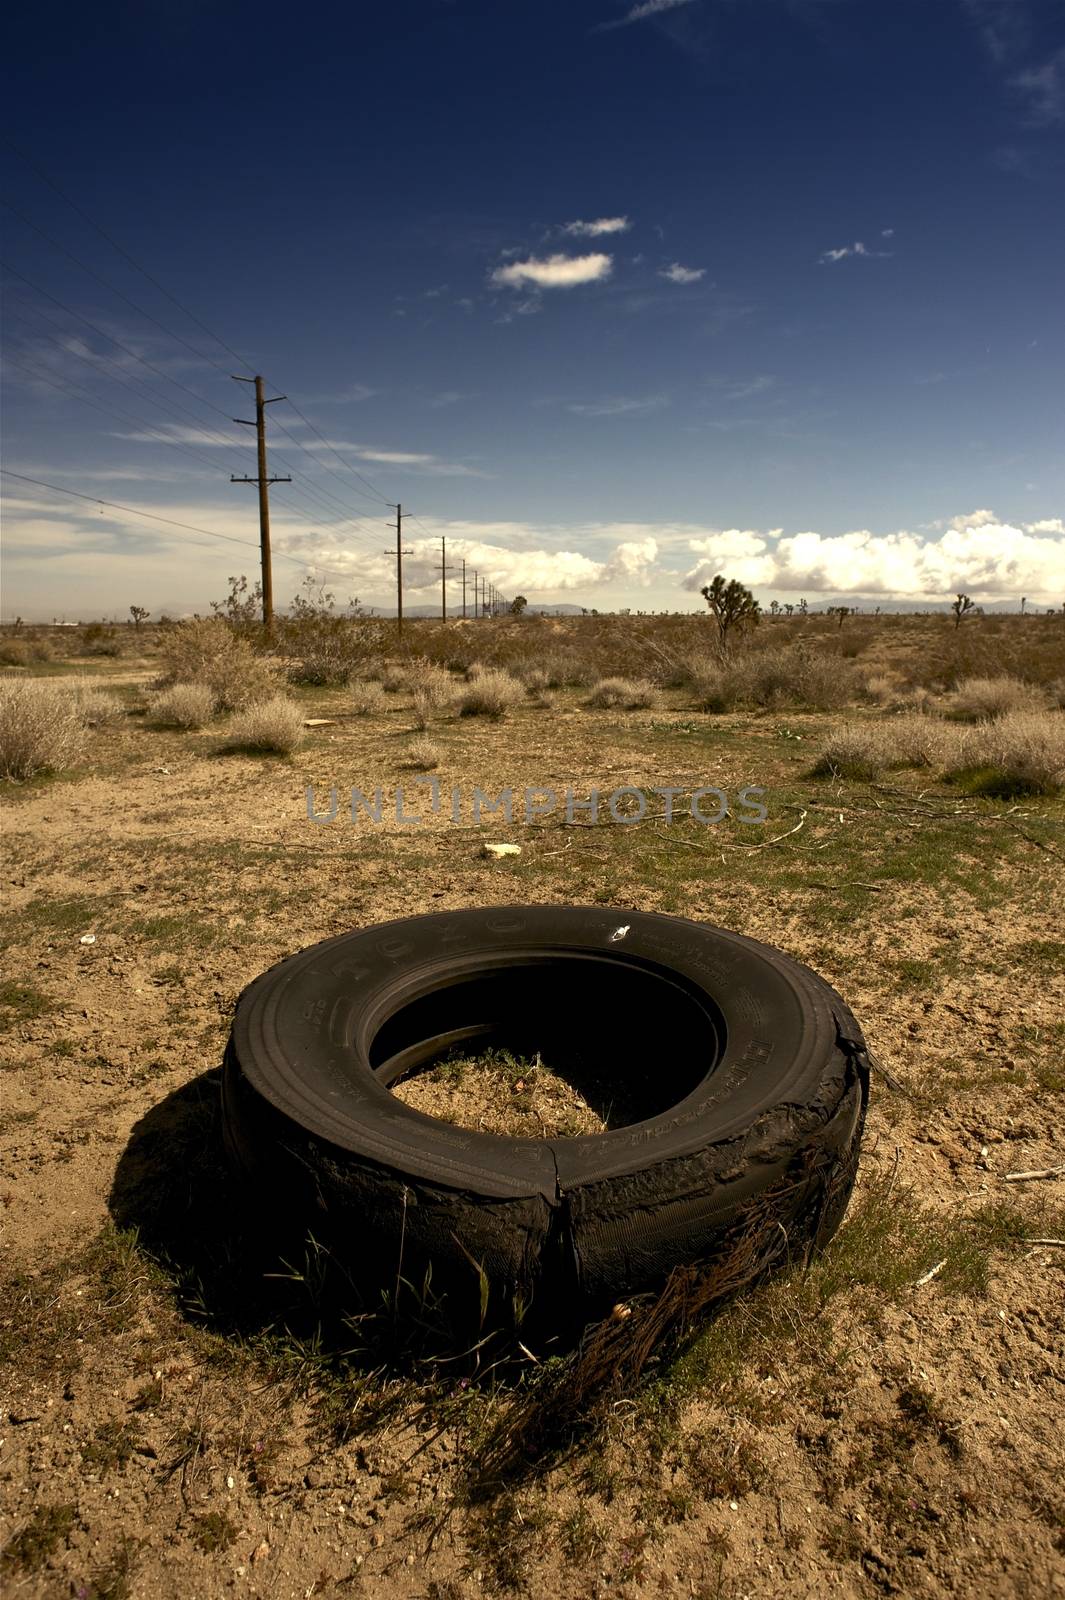 Broken Tire - California Outback. East from Los Angeles Deserts. Vertical Photo